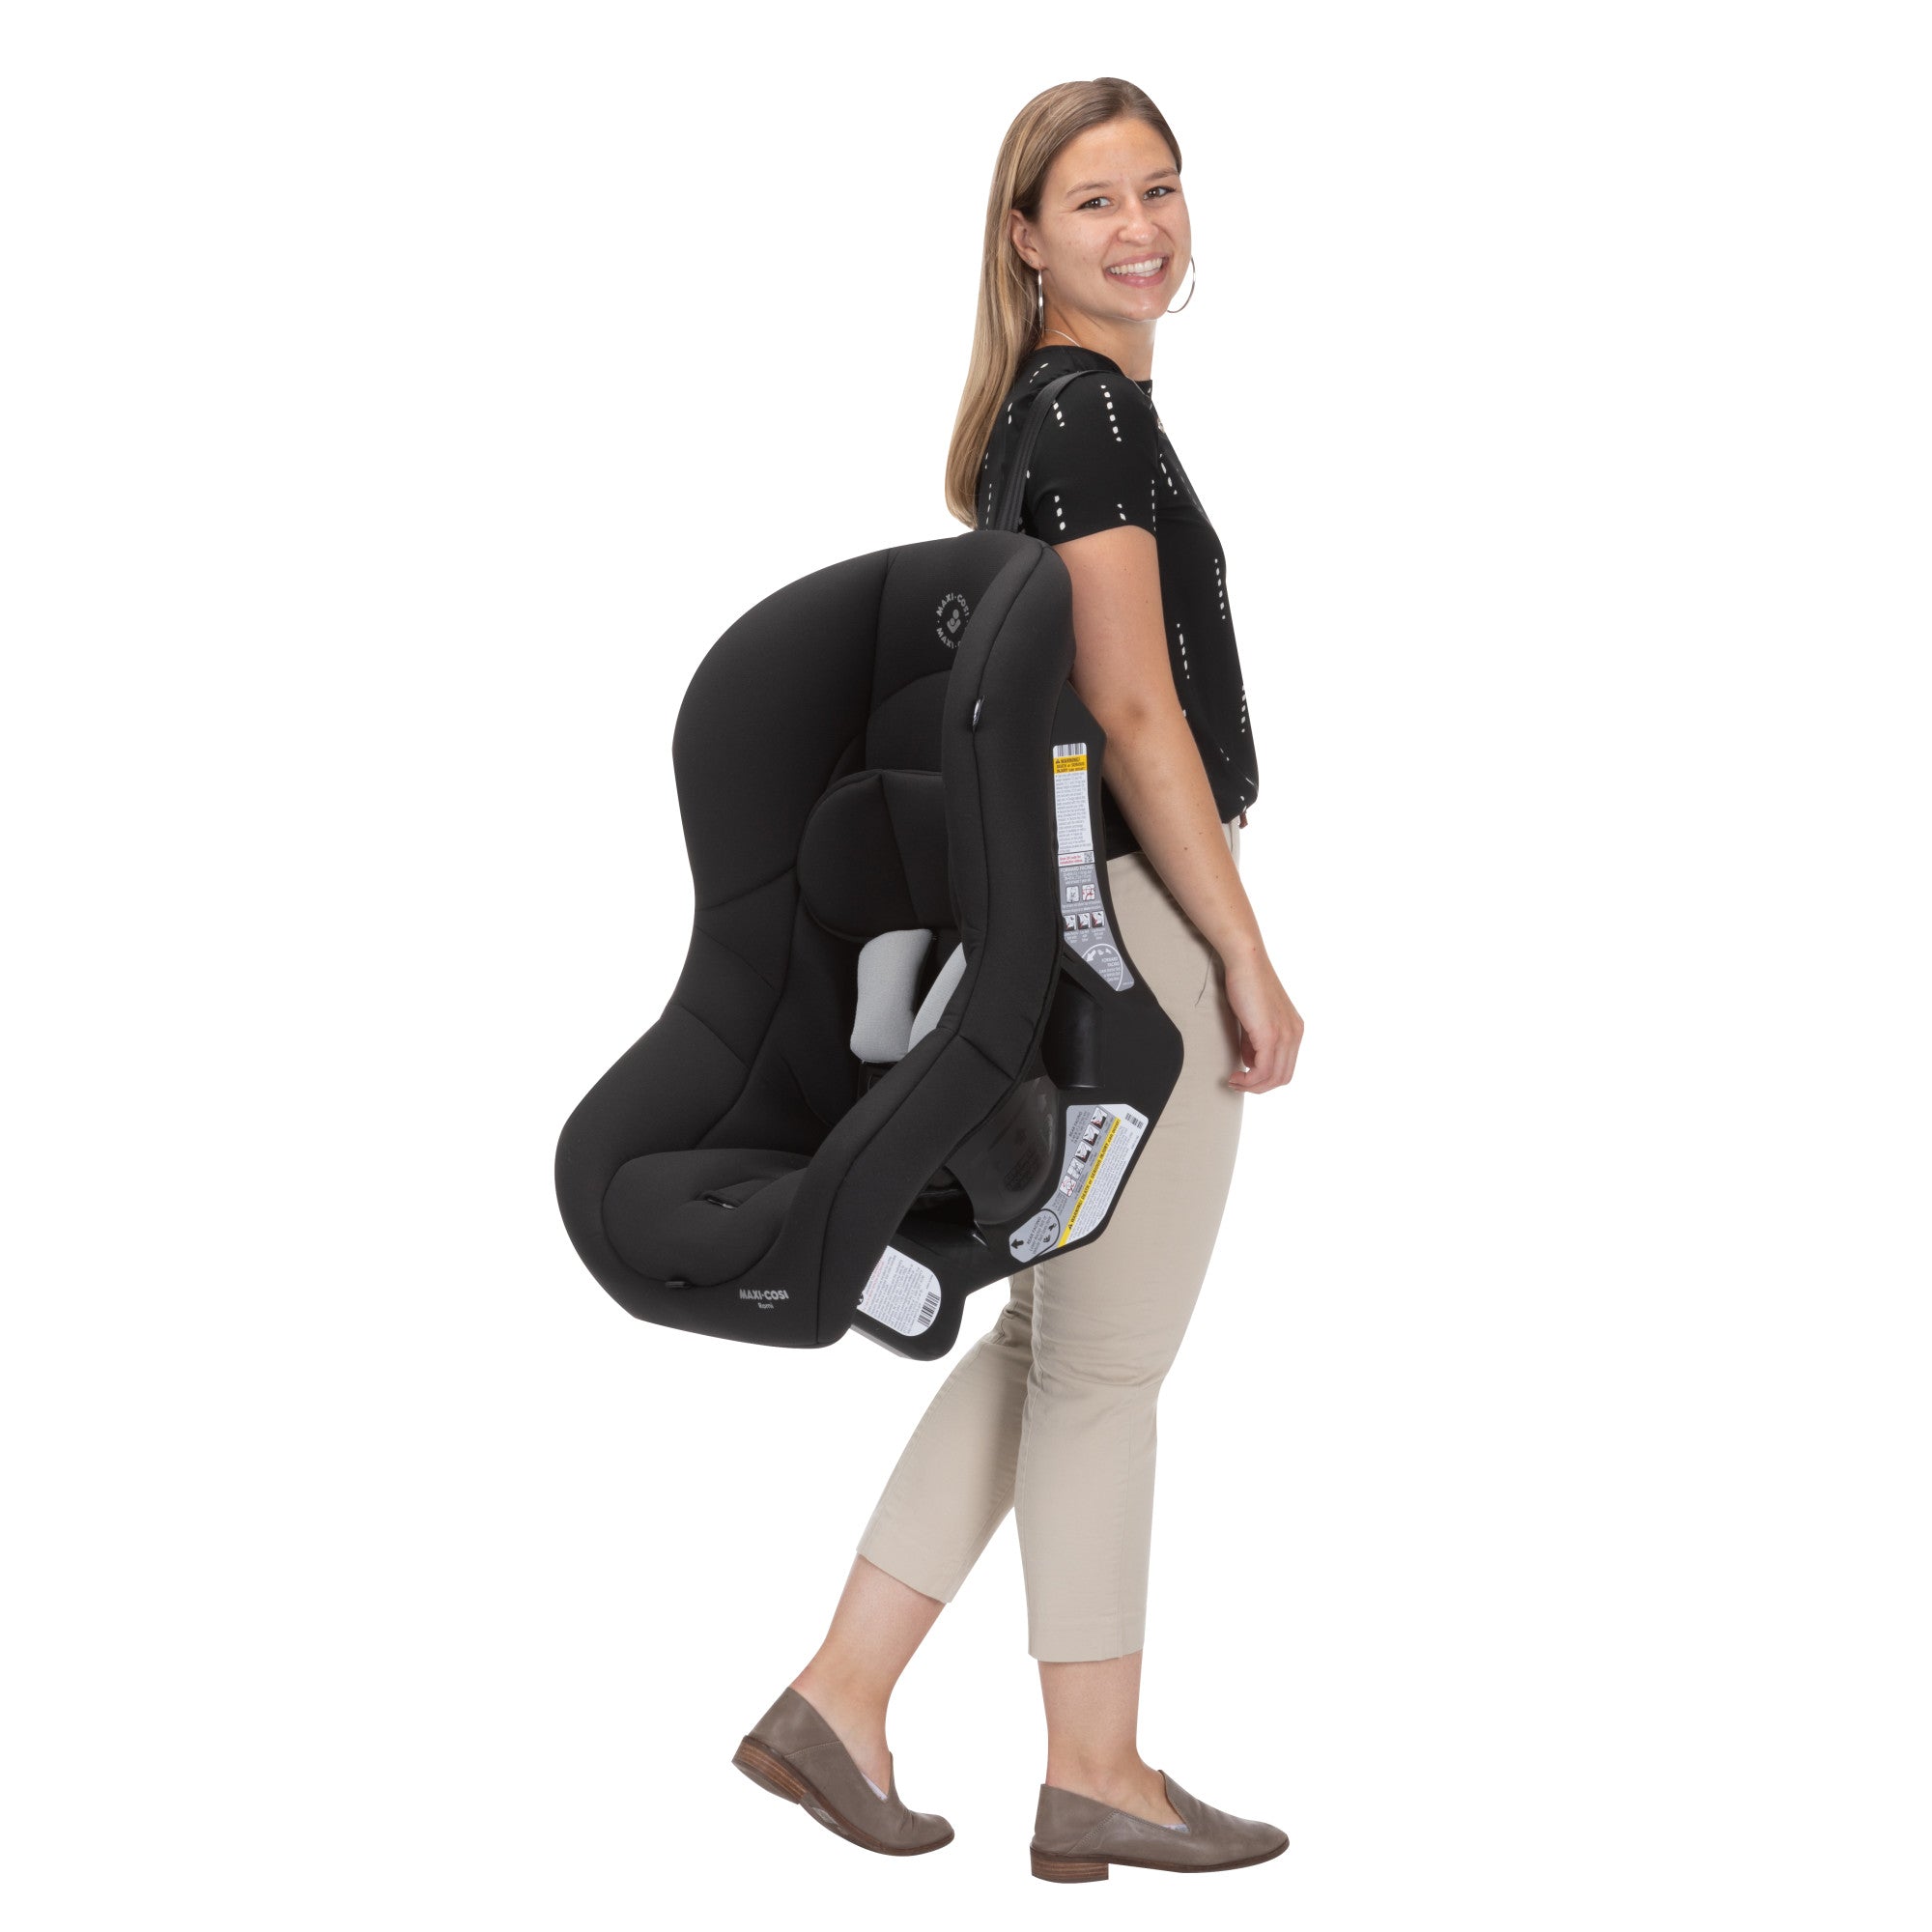 Romi 2-in-1 Convertible Car Seat - woman carrying seat on back